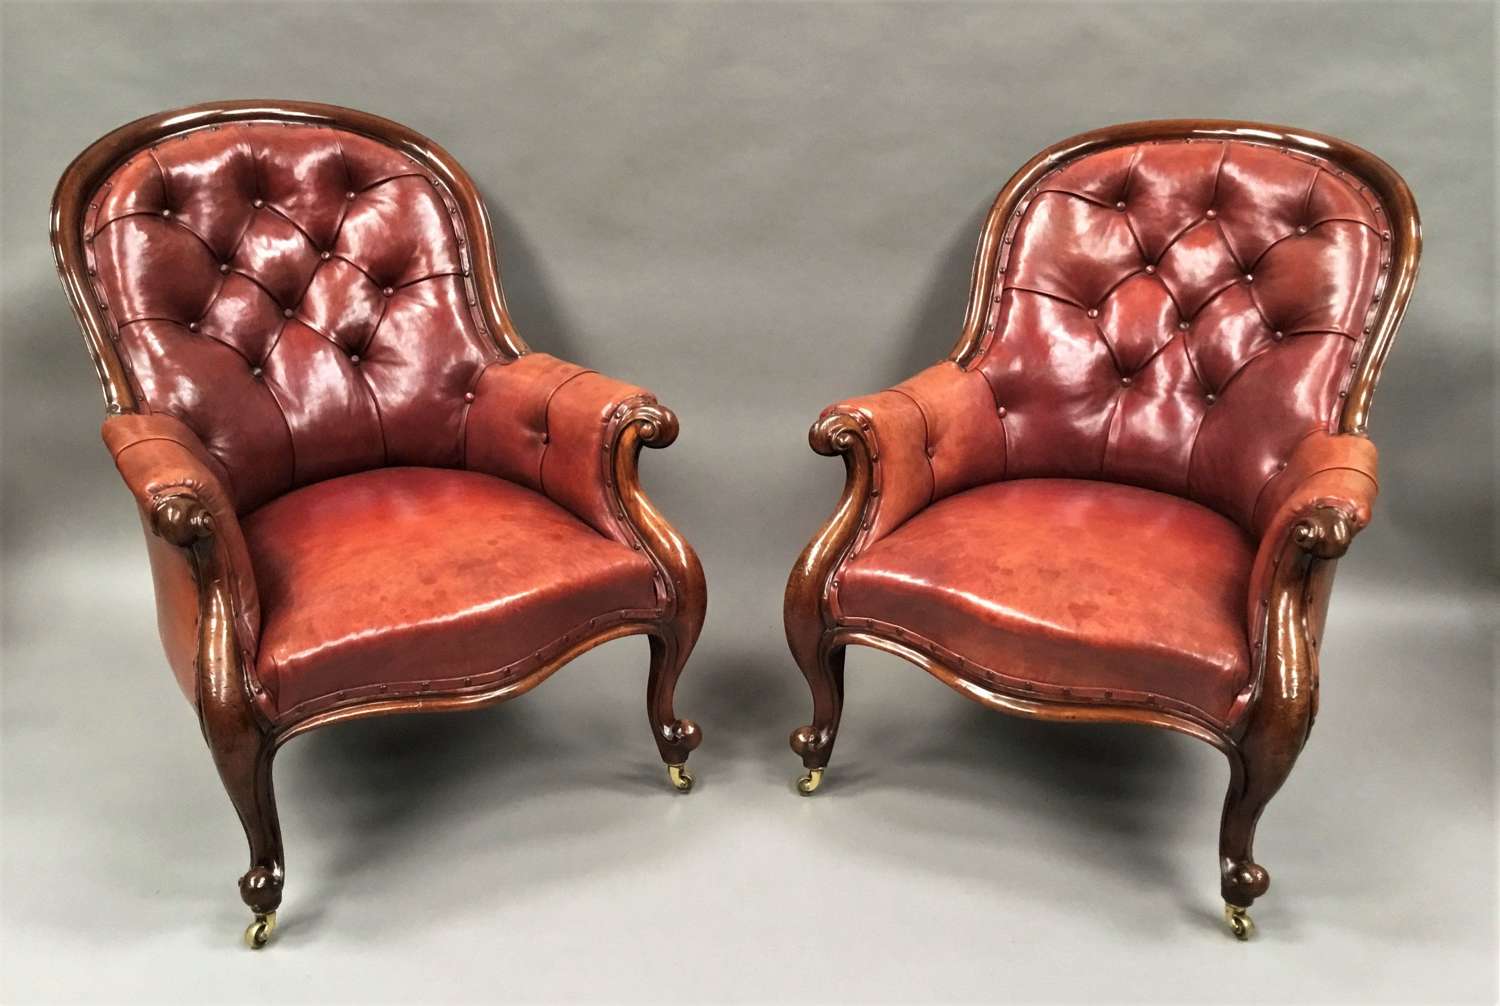 Mid C19th pair of mahogany and leather library armchairs